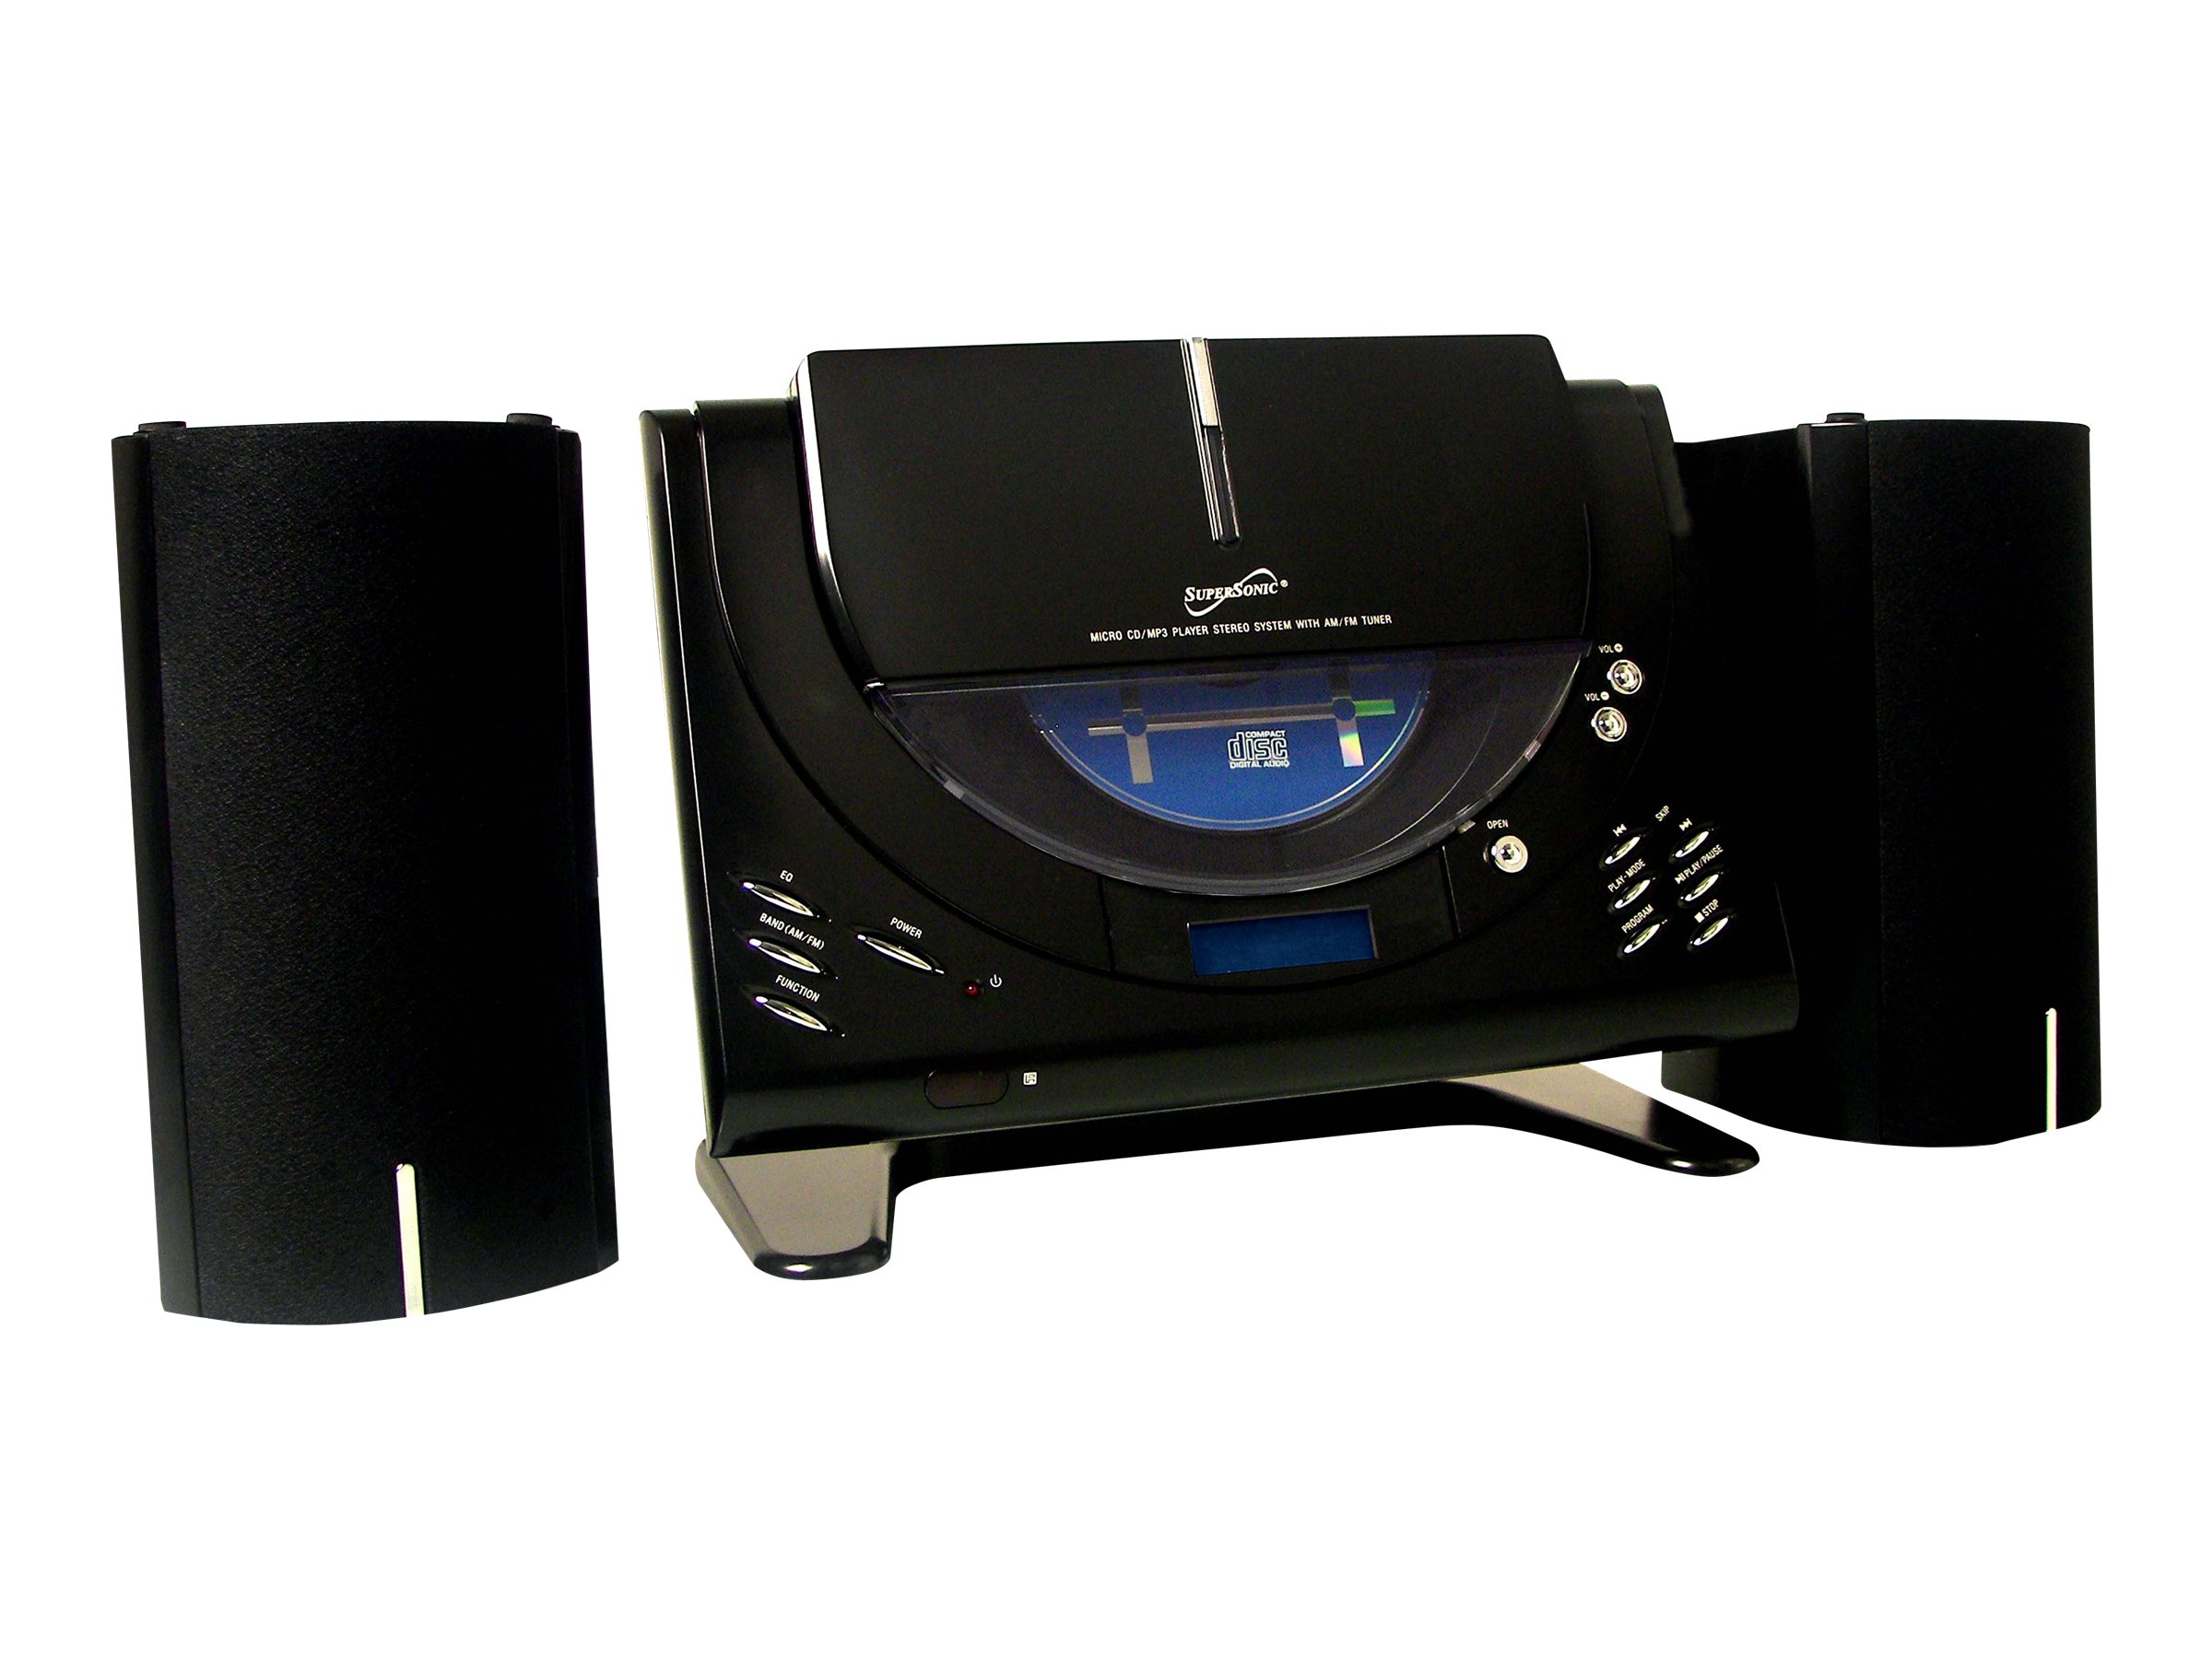 New SUPERSONIC SC-3399M Vertical Loading CD/MP3 Micro System AM/FM Radio SC-3399 - image 1 of 3